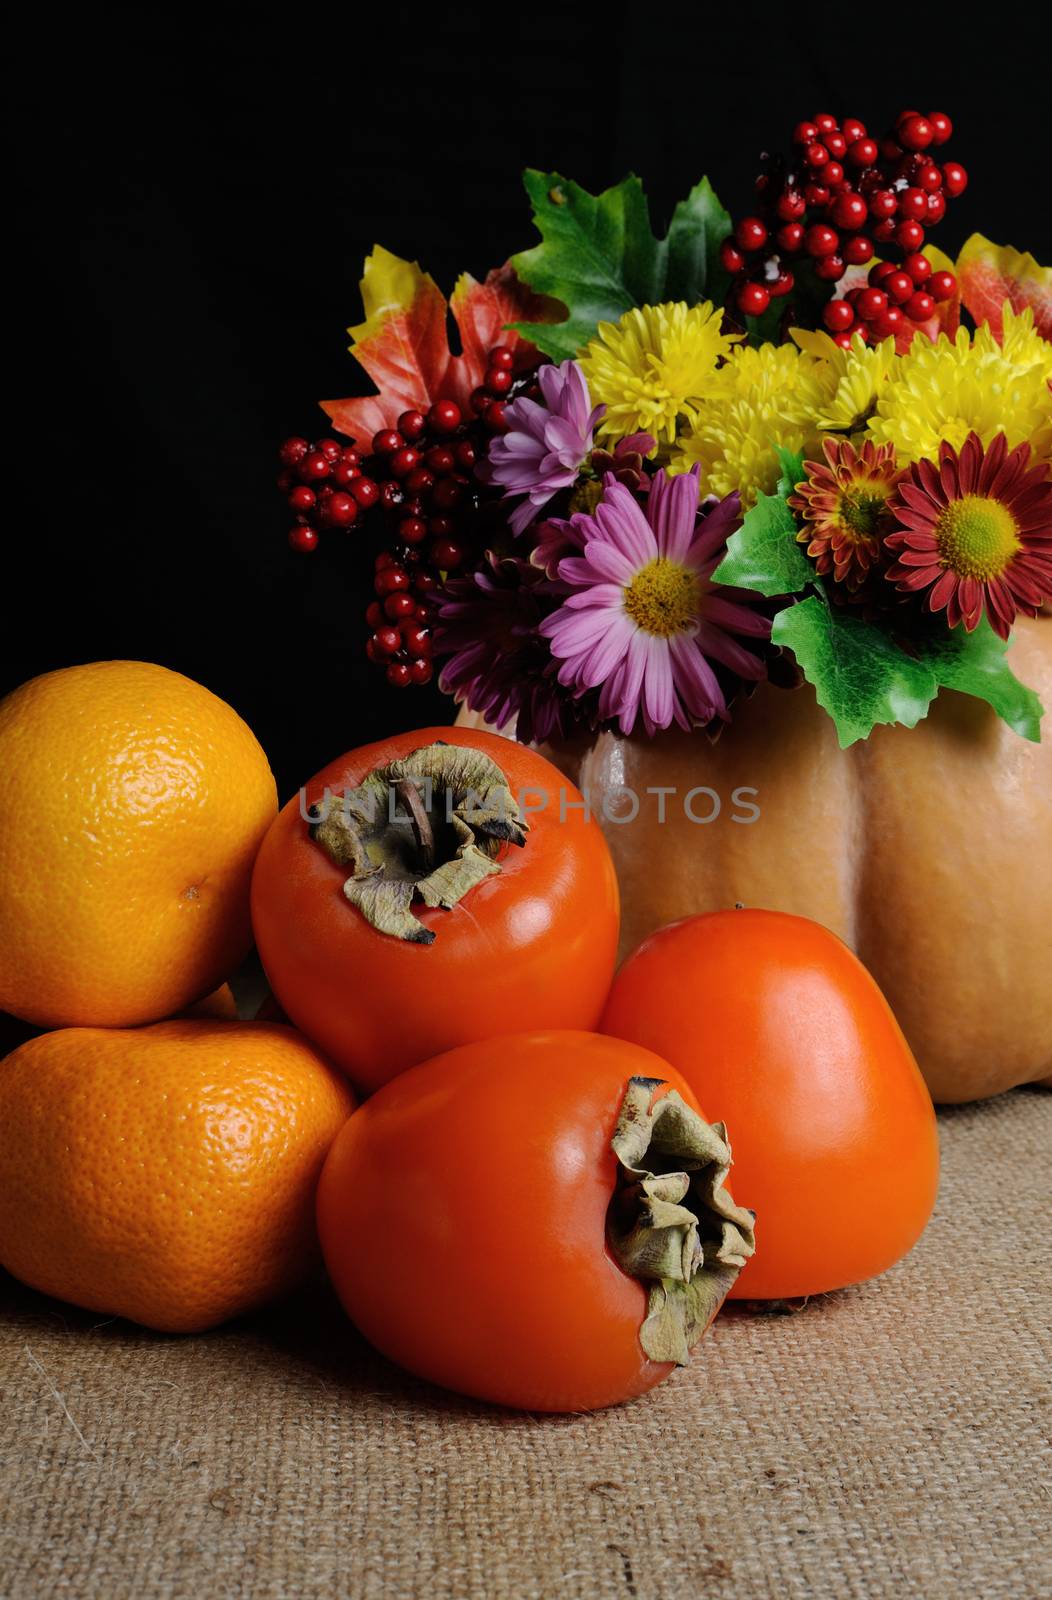 fruit on the table with flowers in a vase pumpkin